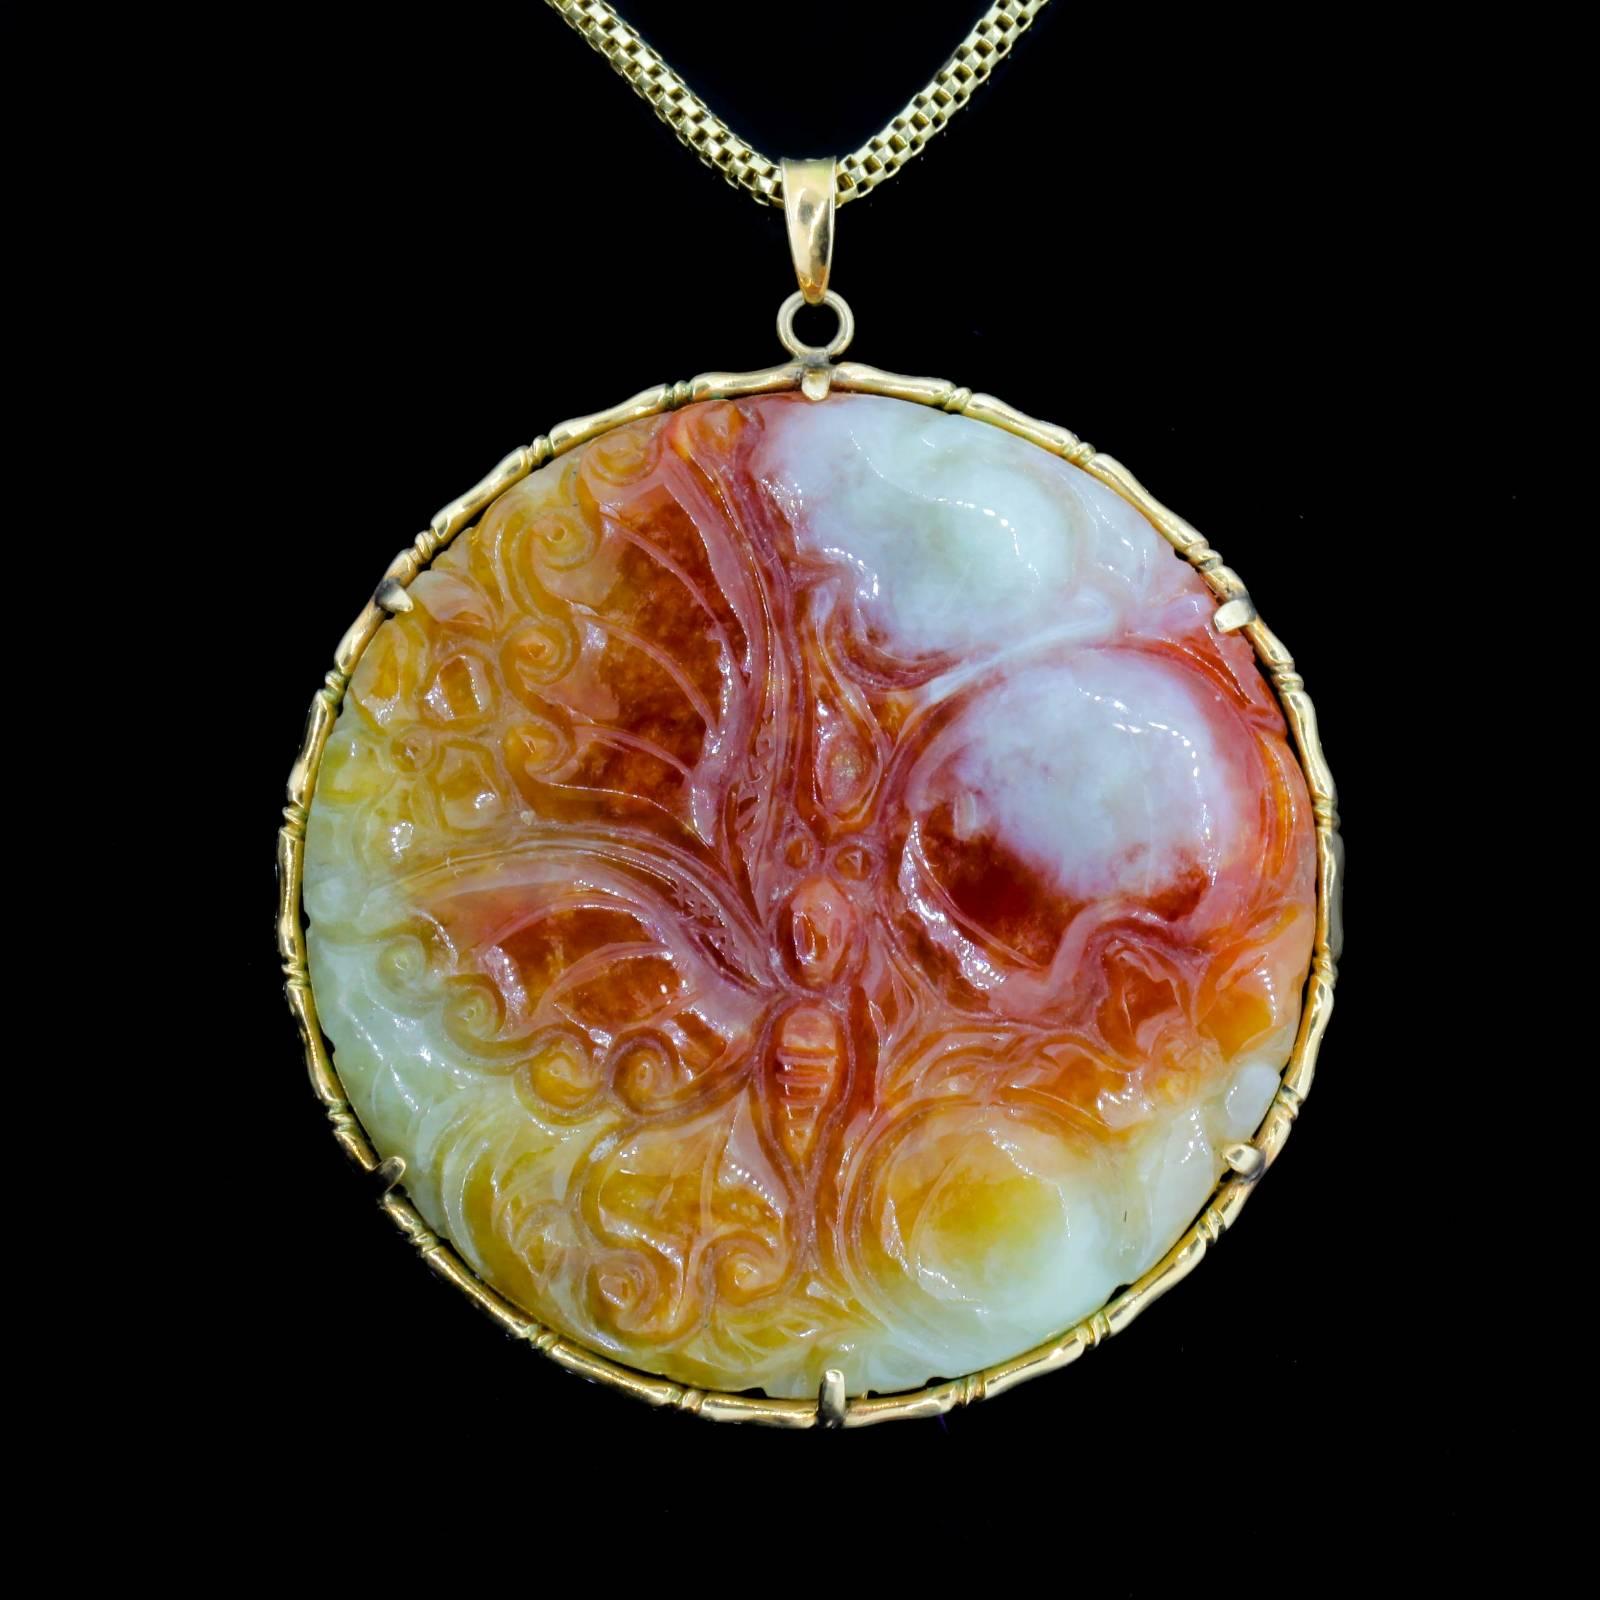 A 1960s carved Jadeite circular plaque with a butterfly and floral motif in mottled colors of brownish-red, gold, yellow and white.  The pendant is set in a bamboo design 14KT yellow gold frame, and measures 2 1/4 inches in diameter, suspended from